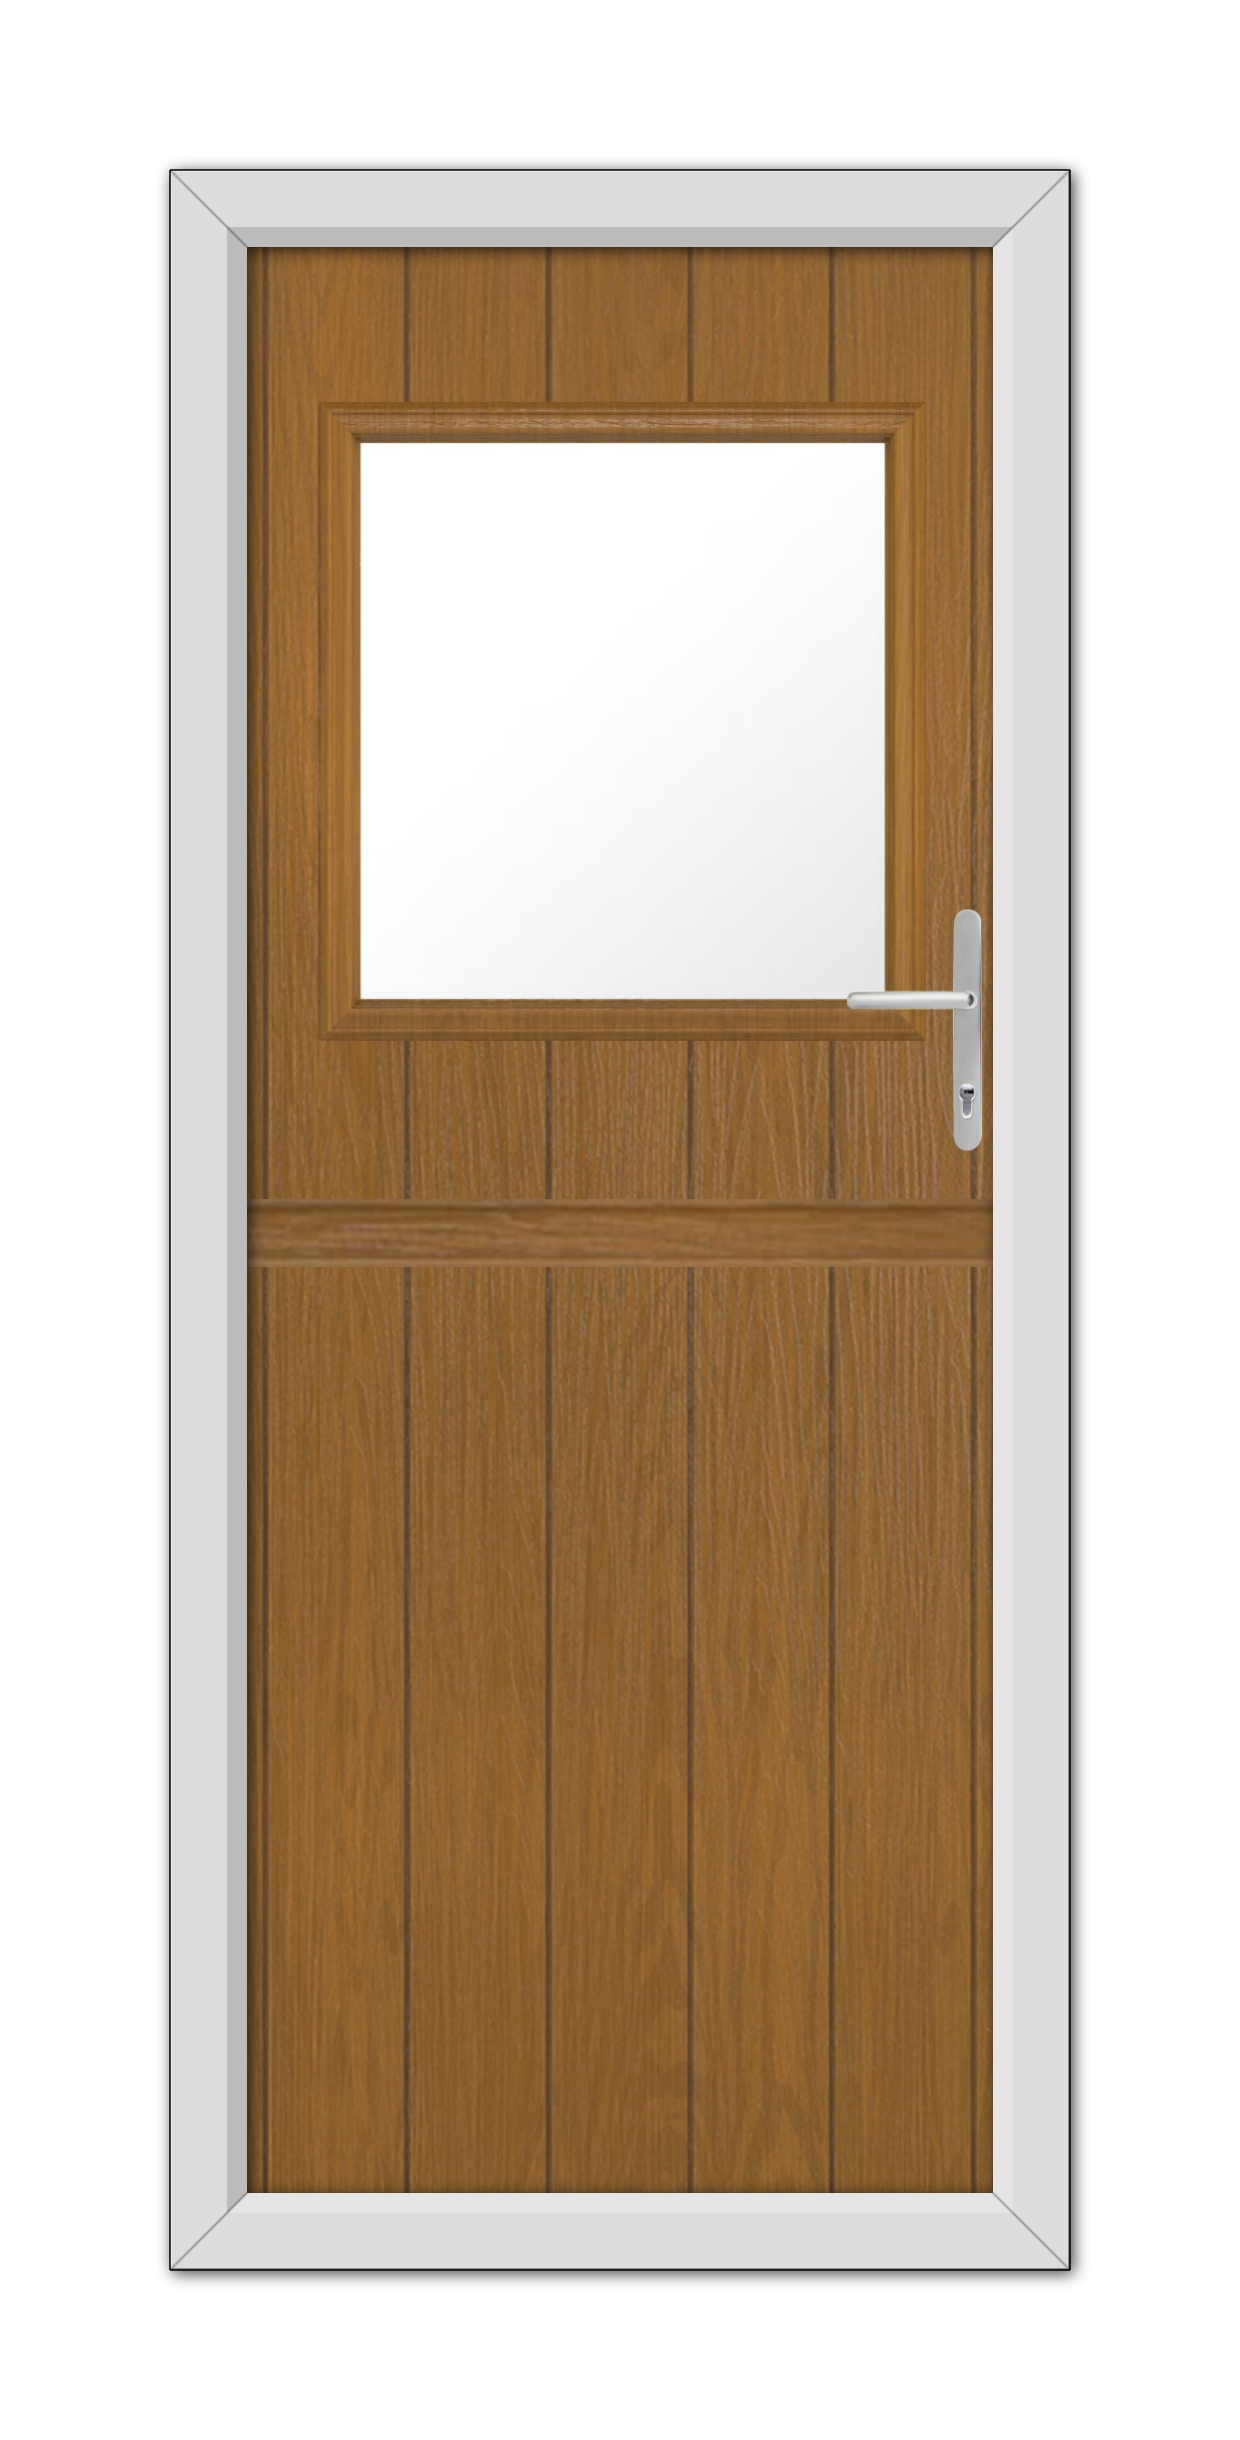 A Oak Fife Stable Composite Door 48mm Timber Core with a small, centered window, framed in white, featuring a modern handle on the right side.